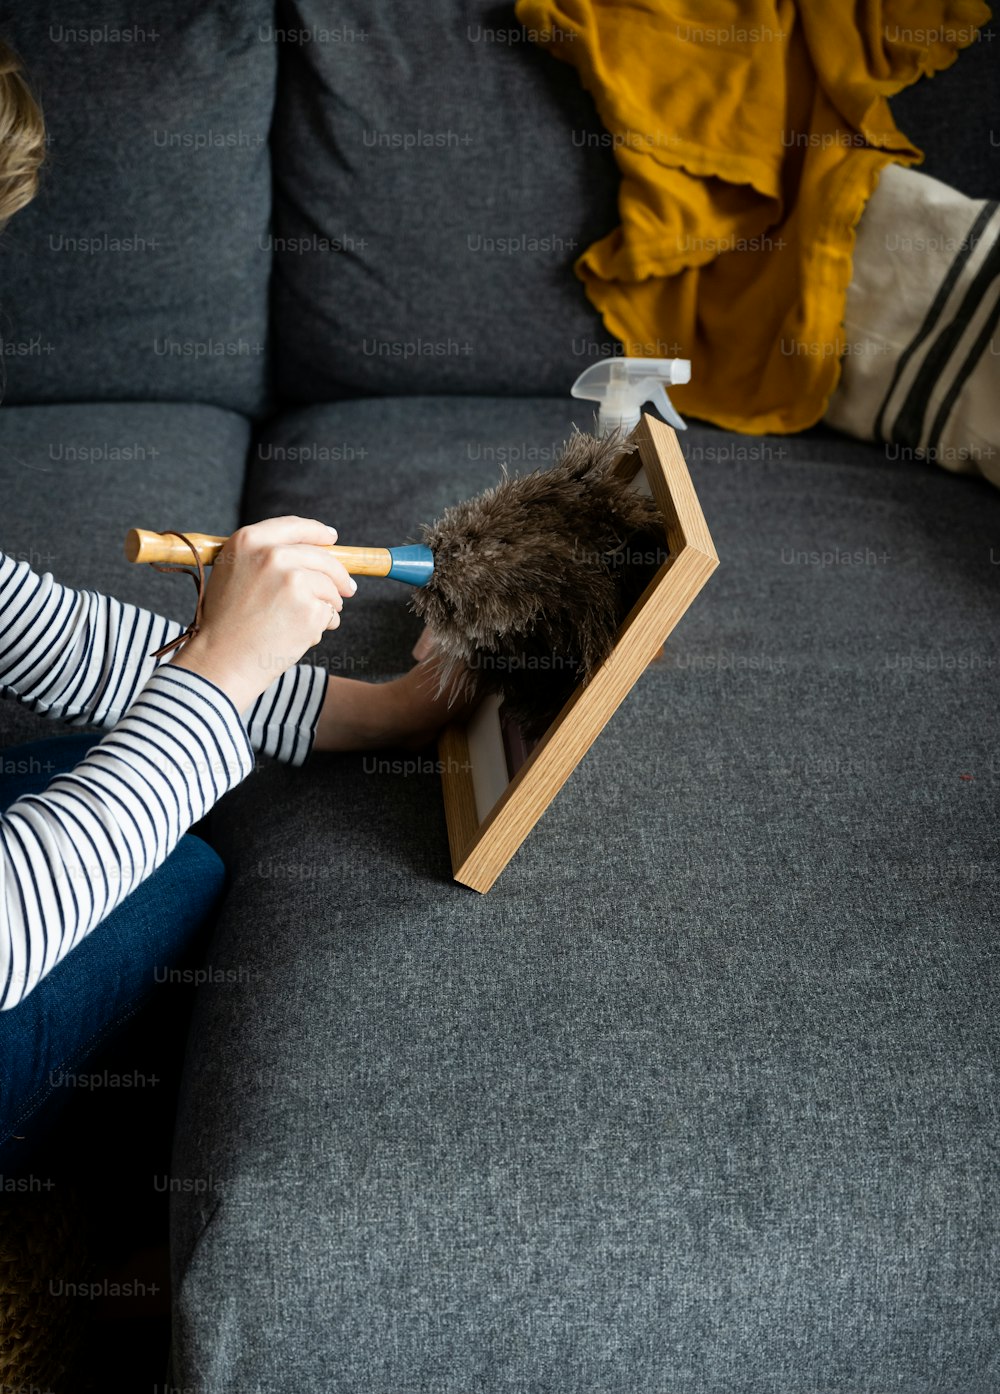 a woman sitting on top of a couch holding a pair of scissors